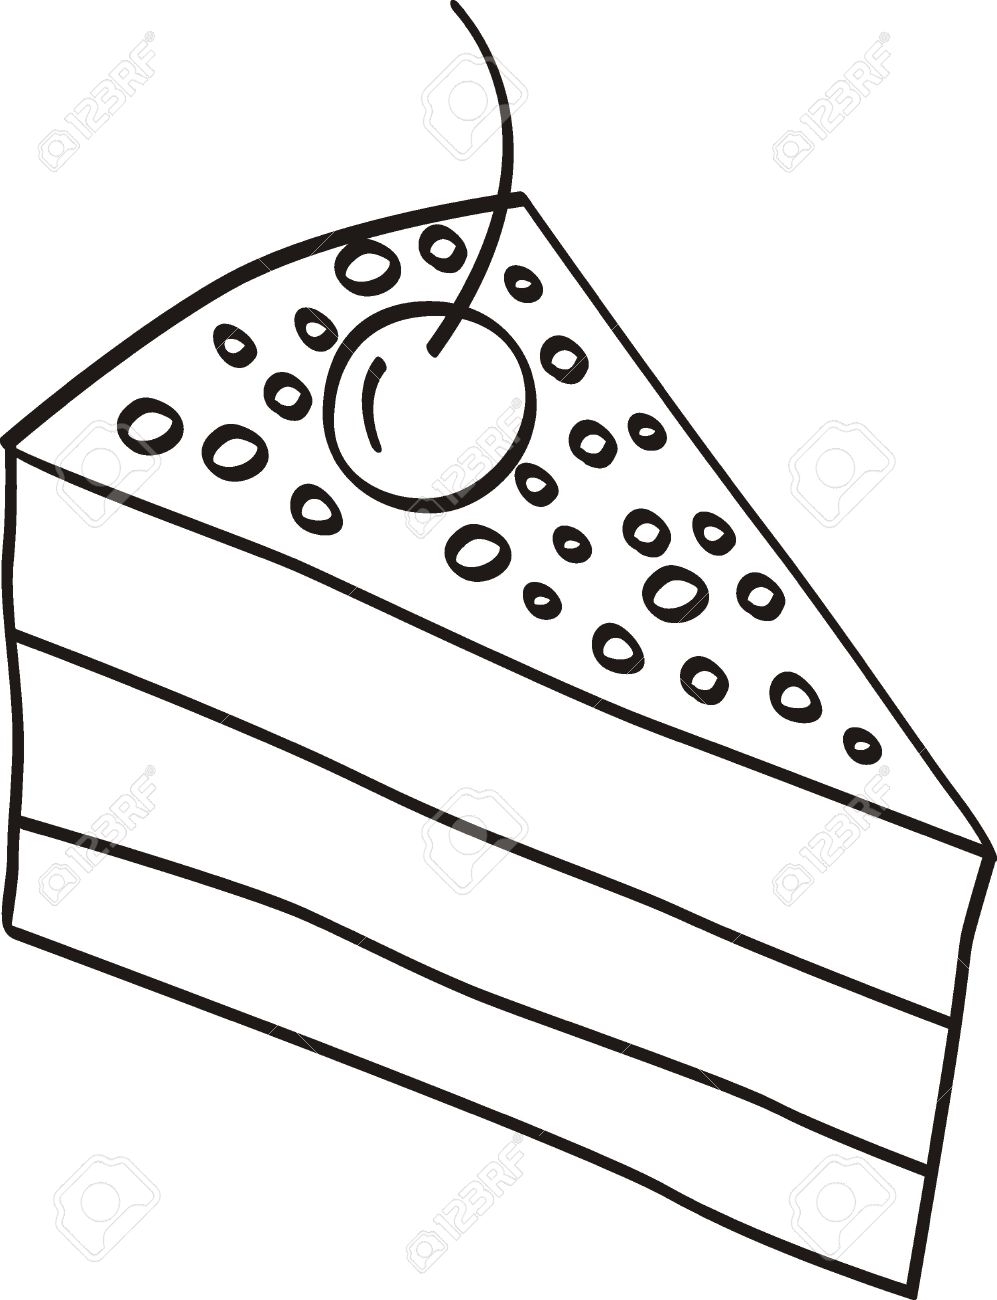 Slice Of Cake Clipart Black And White.